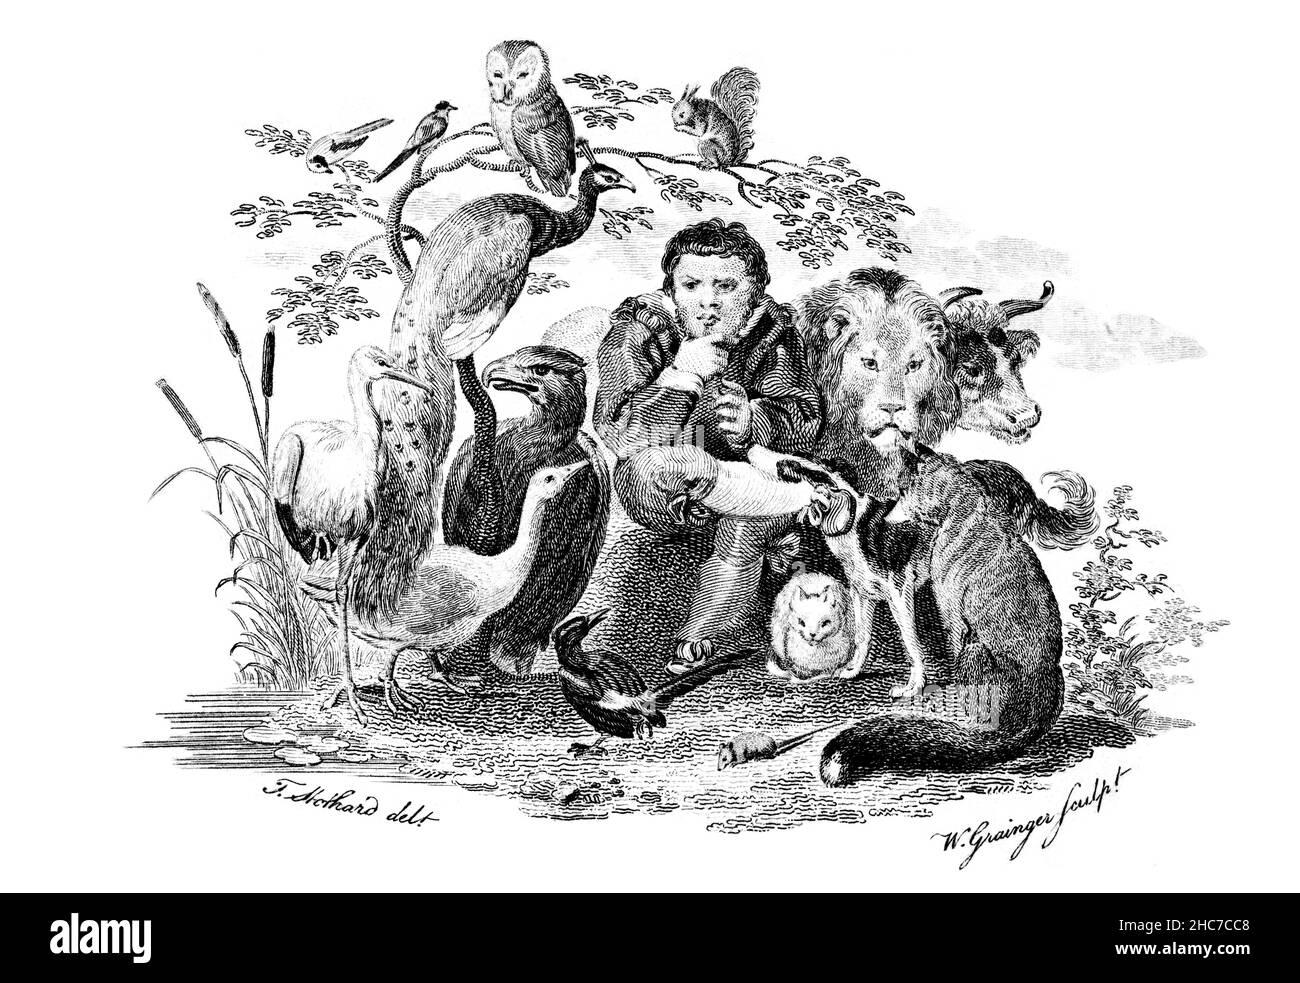 engraved frontispiece illustration of 1793 First Edition of Stockdale’s Aesop’s Fables, drawn by Thomas Stothard, engraved by William Grainger Stock Photo